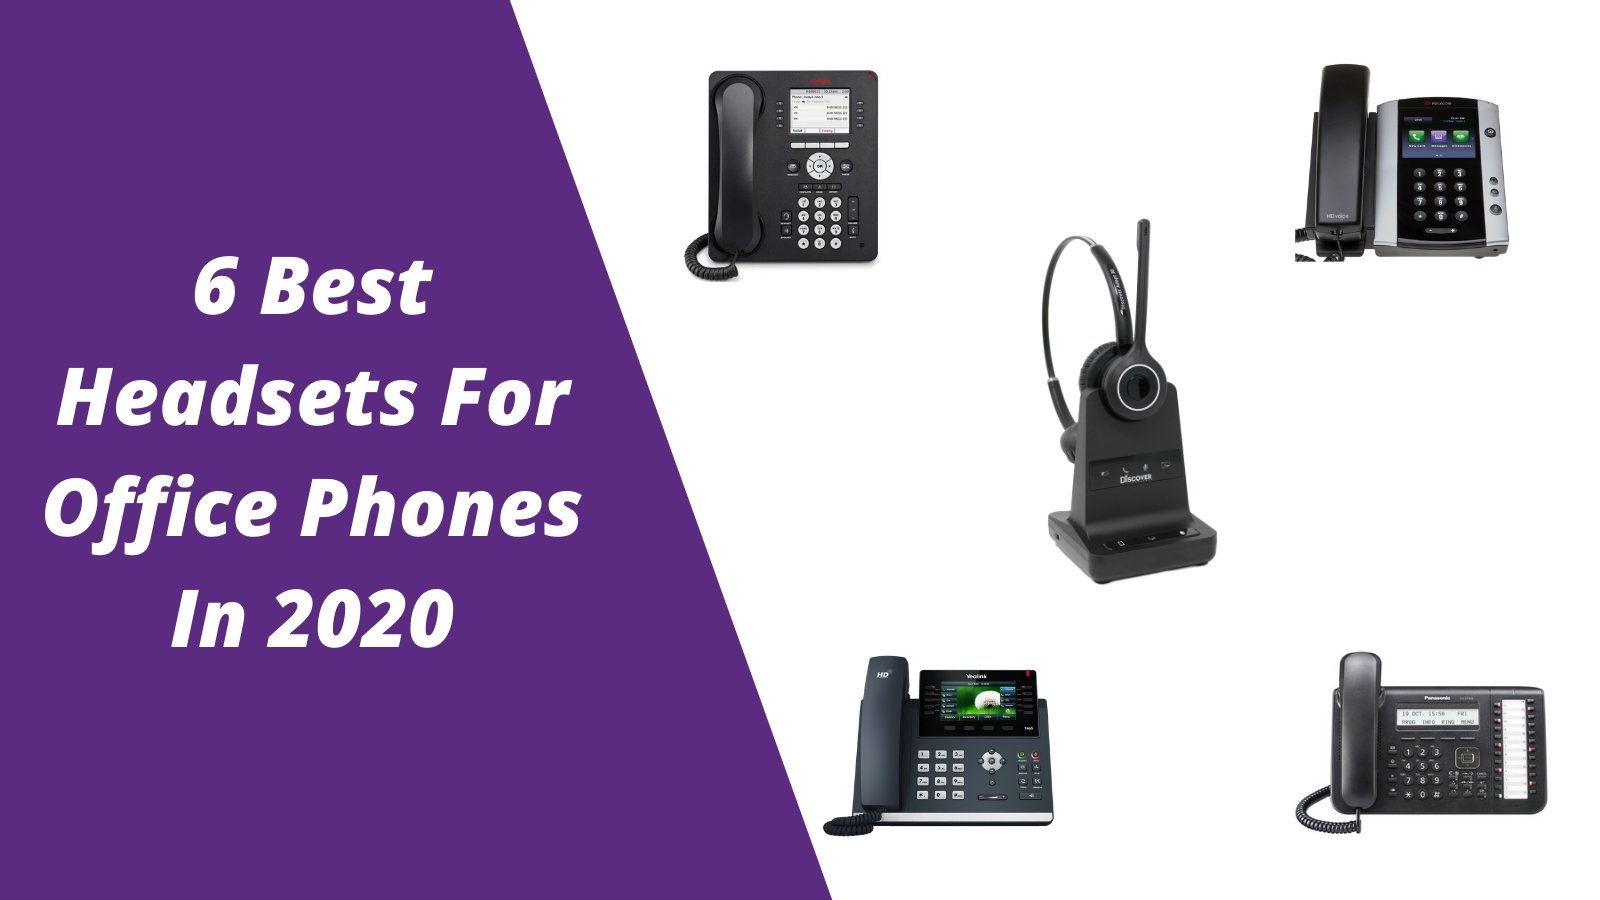 6 Best Headsets for Office Phones in 2020: Read this before Making a Decision - Headset Advisor